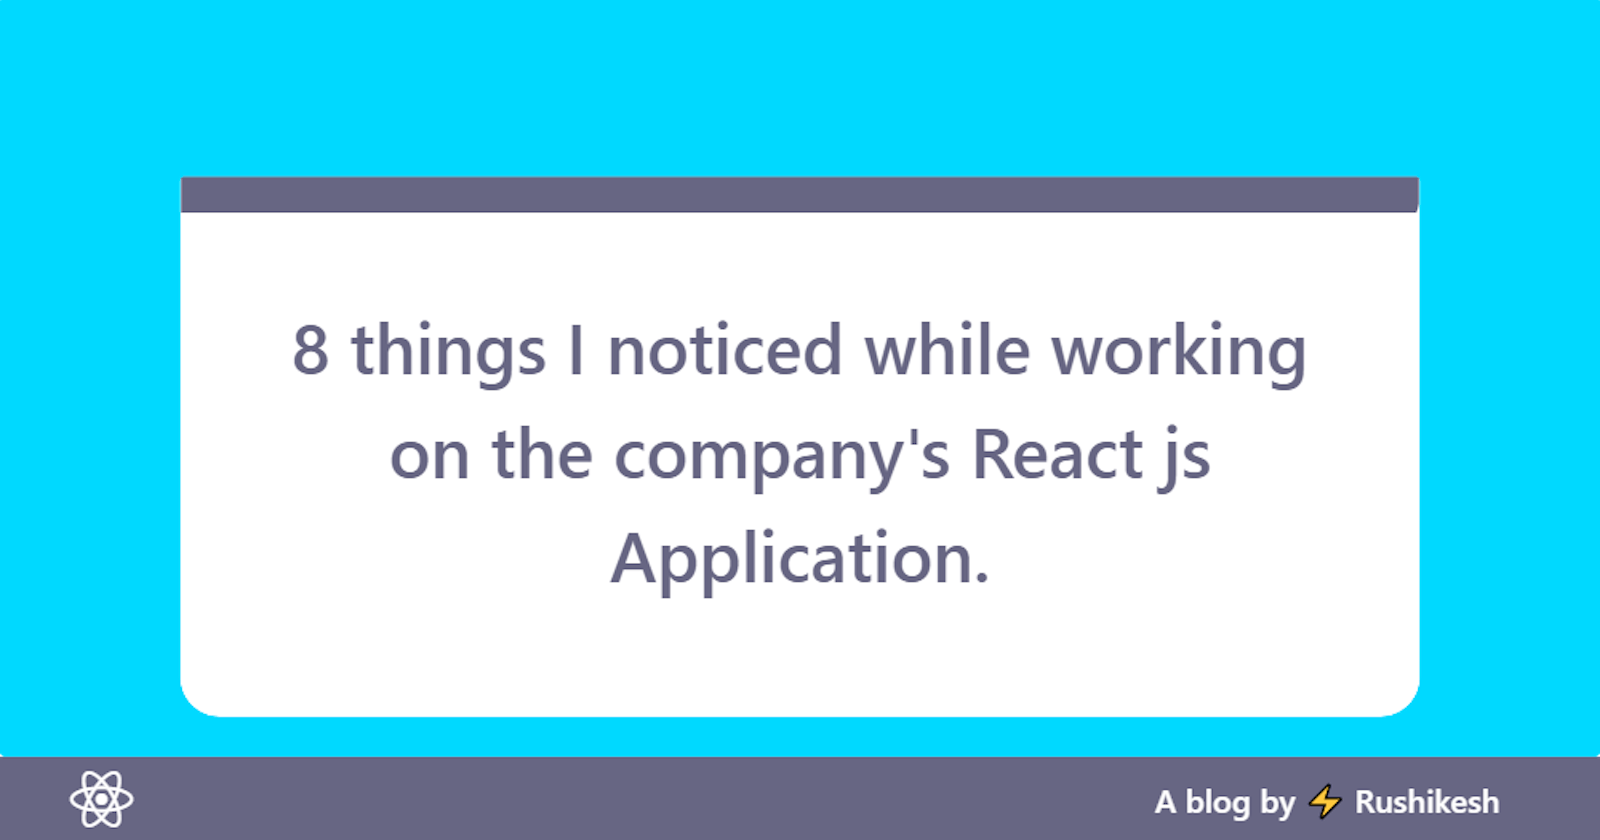 8 things I noticed while working on the company's React js Application.